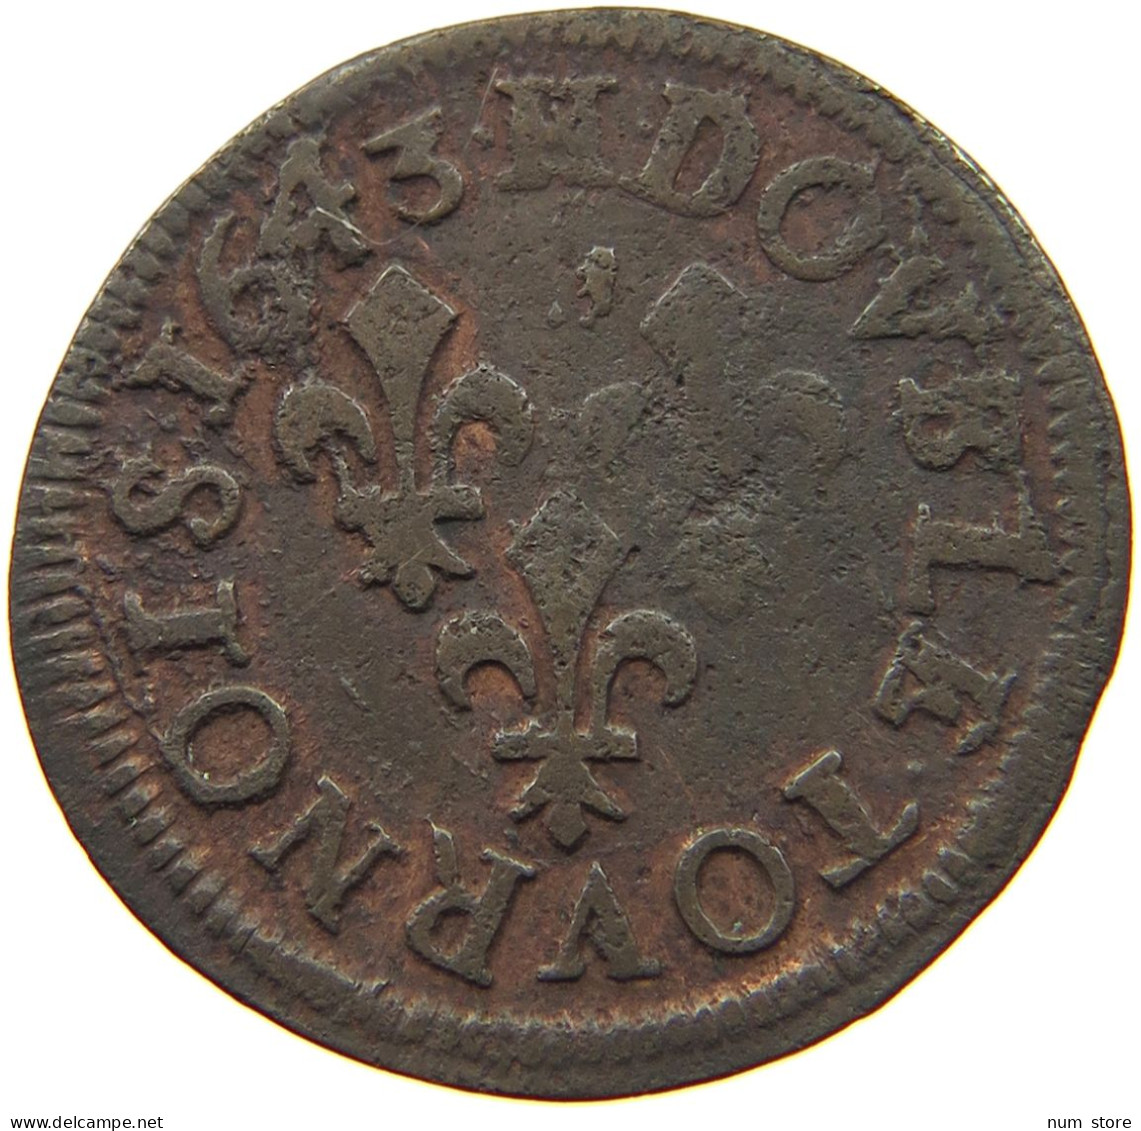 FRANCE TOURNOIS 1643 LOUIS XIII. #MA 001663 - 1610-1643 Louis XIII The Just